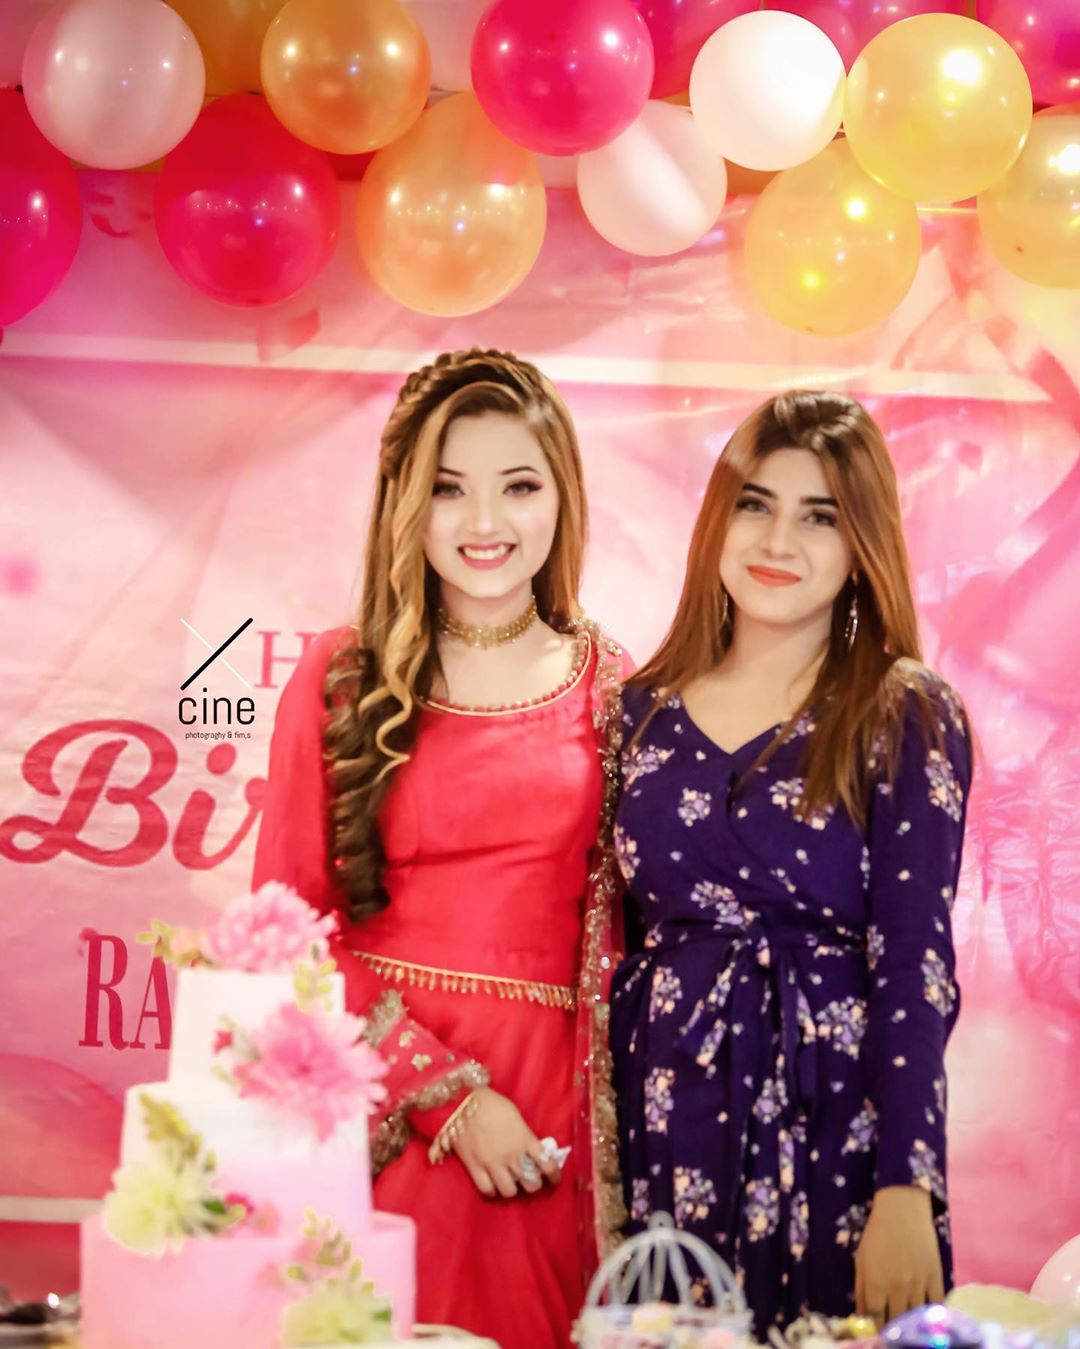 WOW 360|Actor Kashif Khan's Daughter Rabeeca Khan's Grand Birthday Celebration - See Pictures